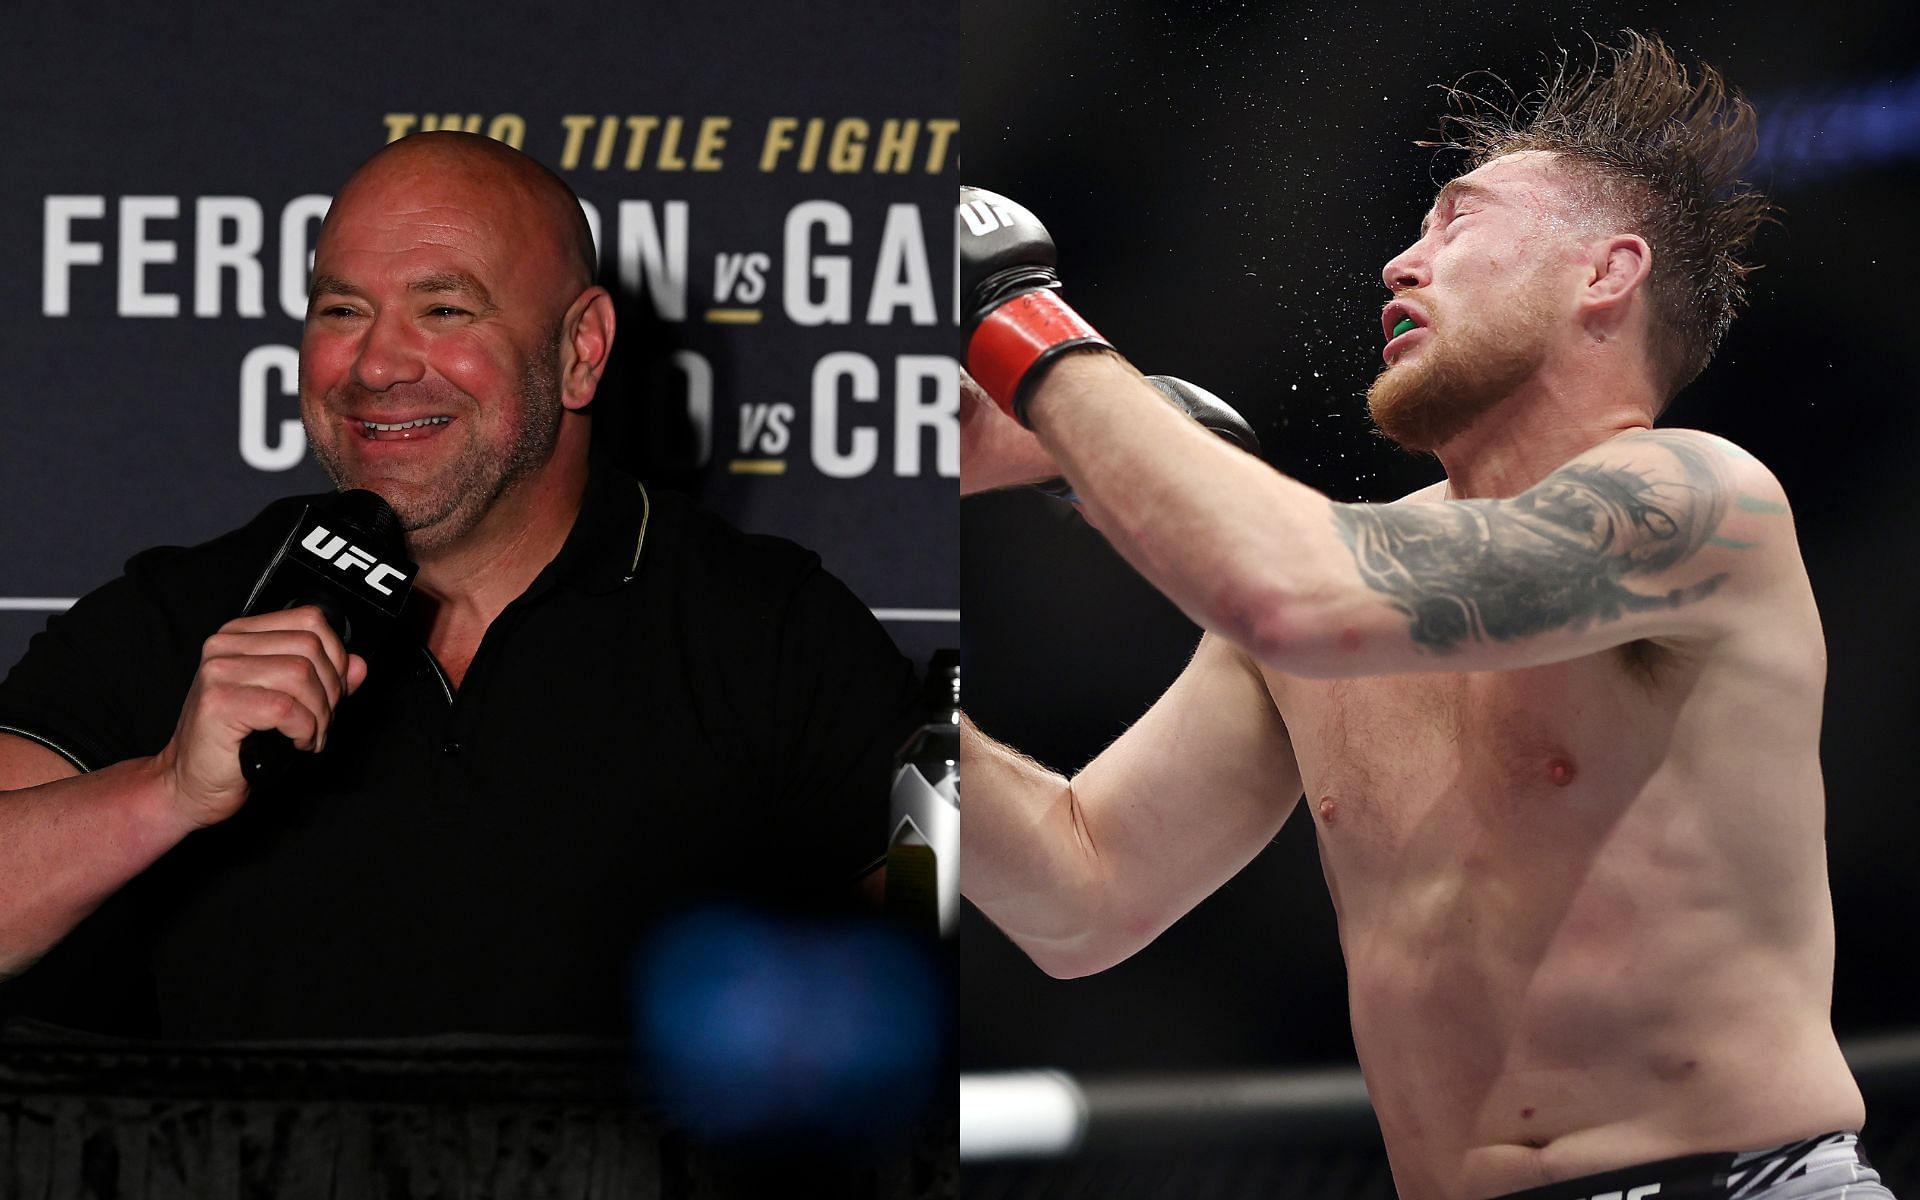 Dana White (left) and Darren Till (right) (Image credits Getty Images)